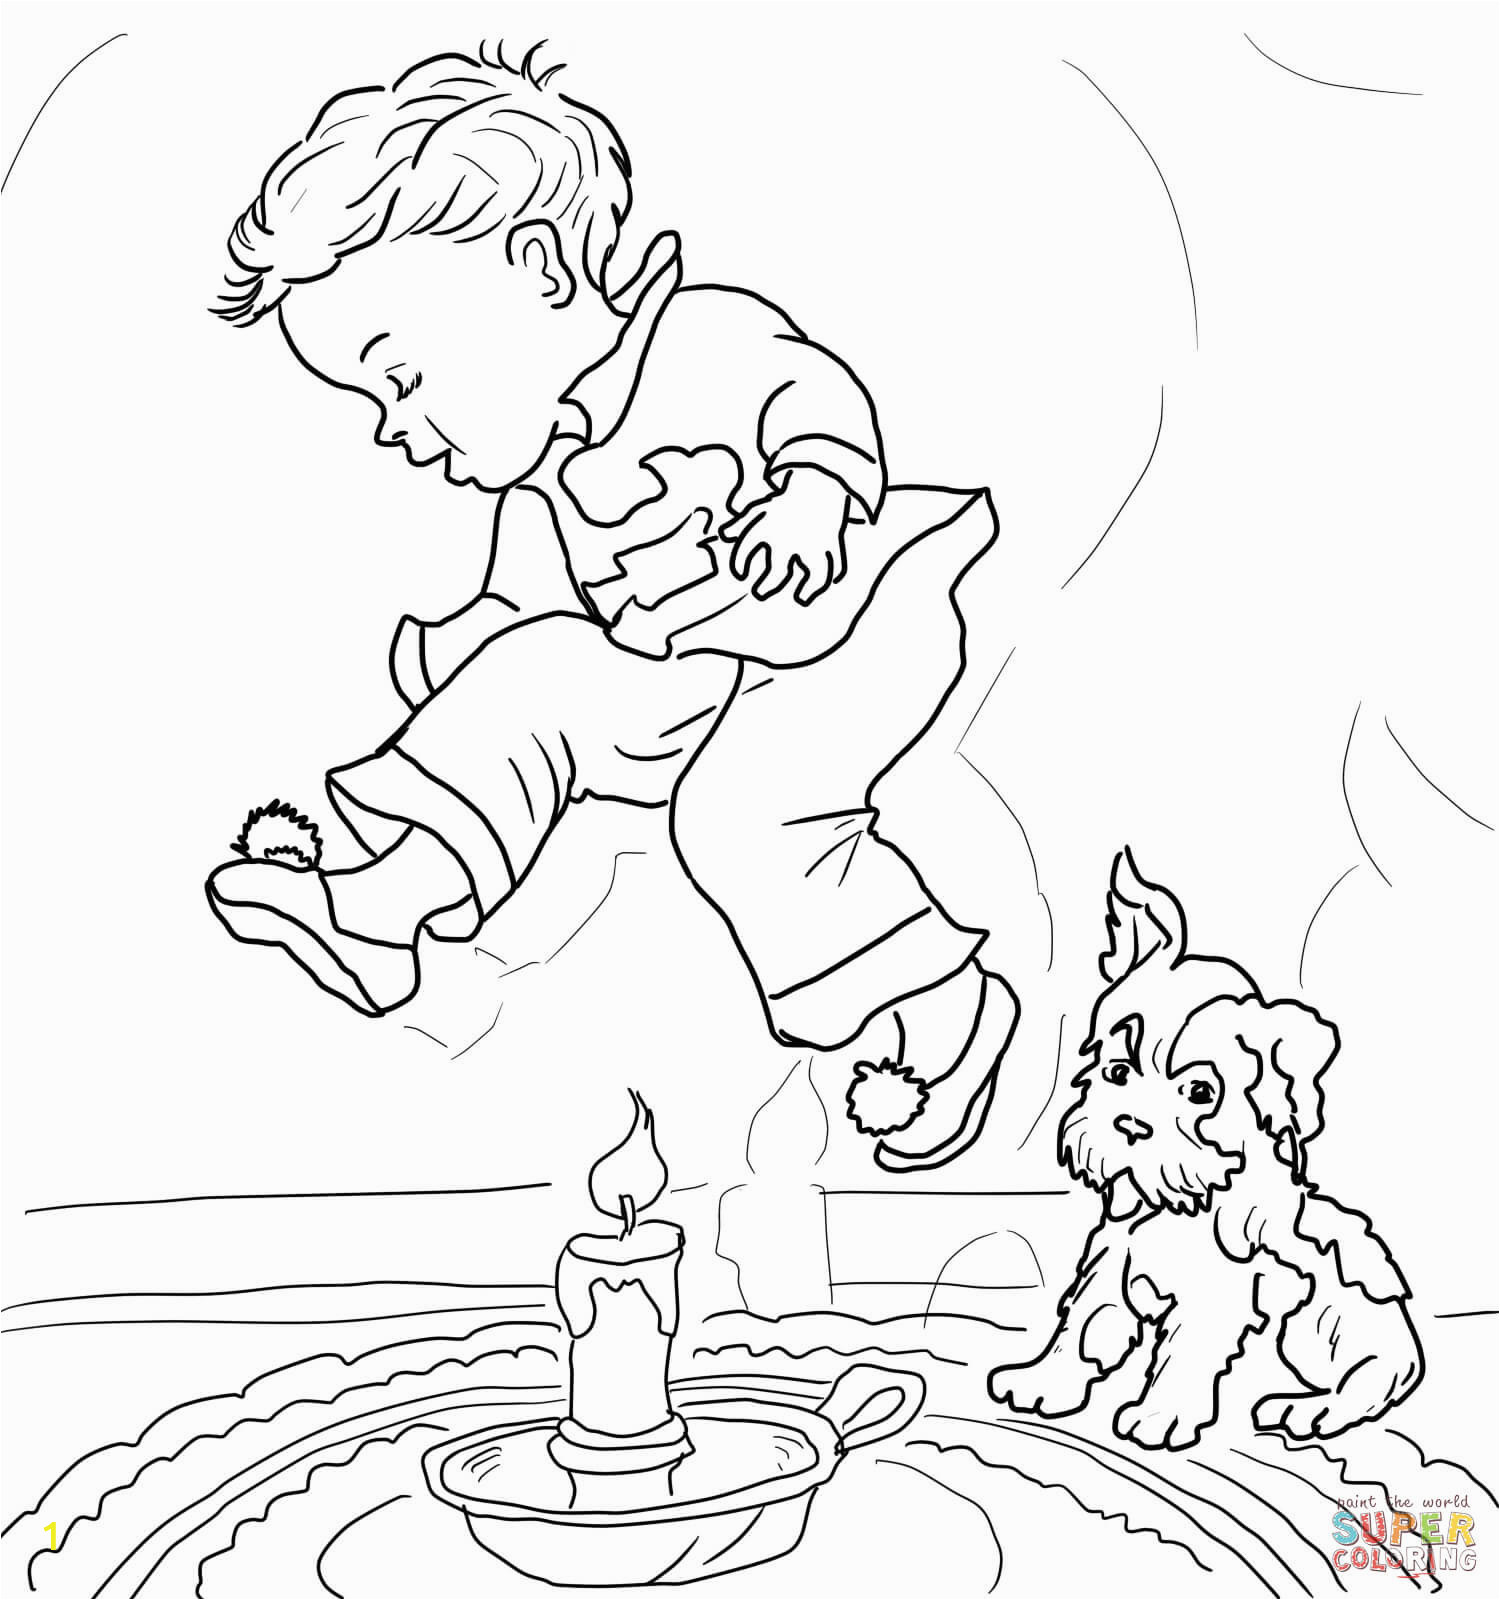 mother goose nursery rhymes coloring pages